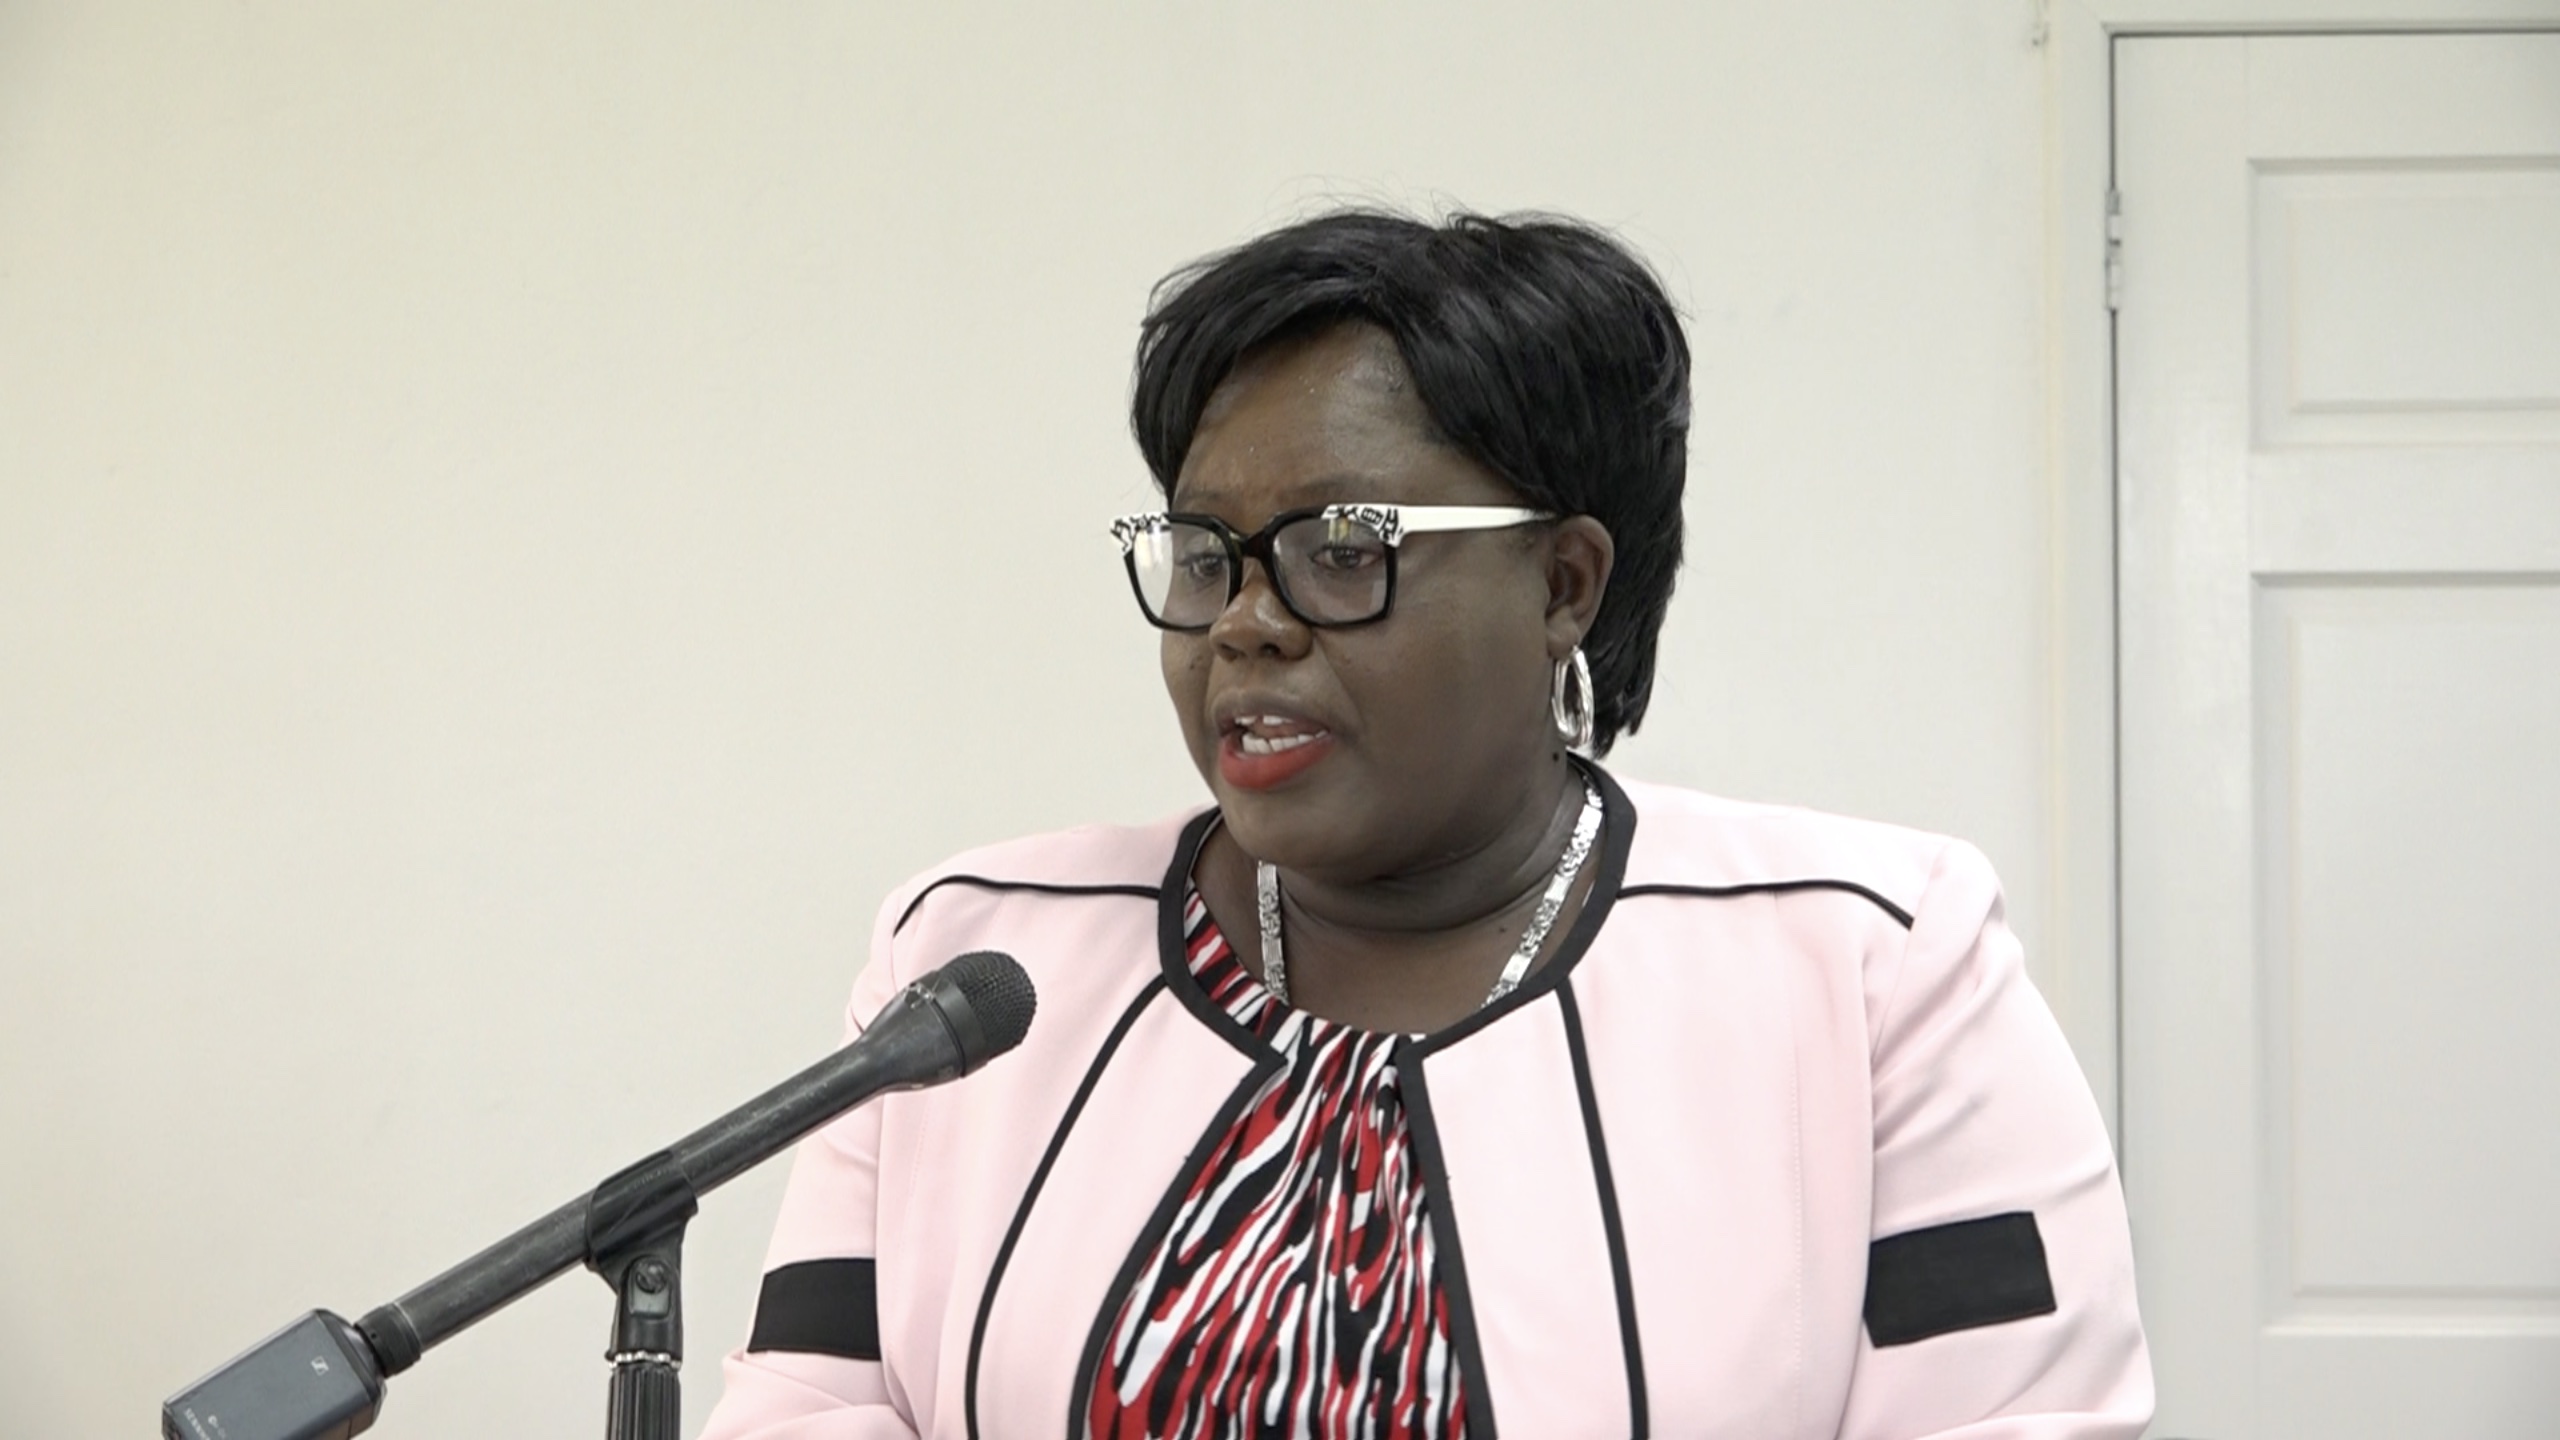 Hon. Hazel Brandy-Williams, Junior Minister of Health and Gender Affairs on Nevis, delivering remarks at the Opening Ceremony of the historic Agri-preneur Conference for women and girls on August 23, 2022, at the GMBC Building